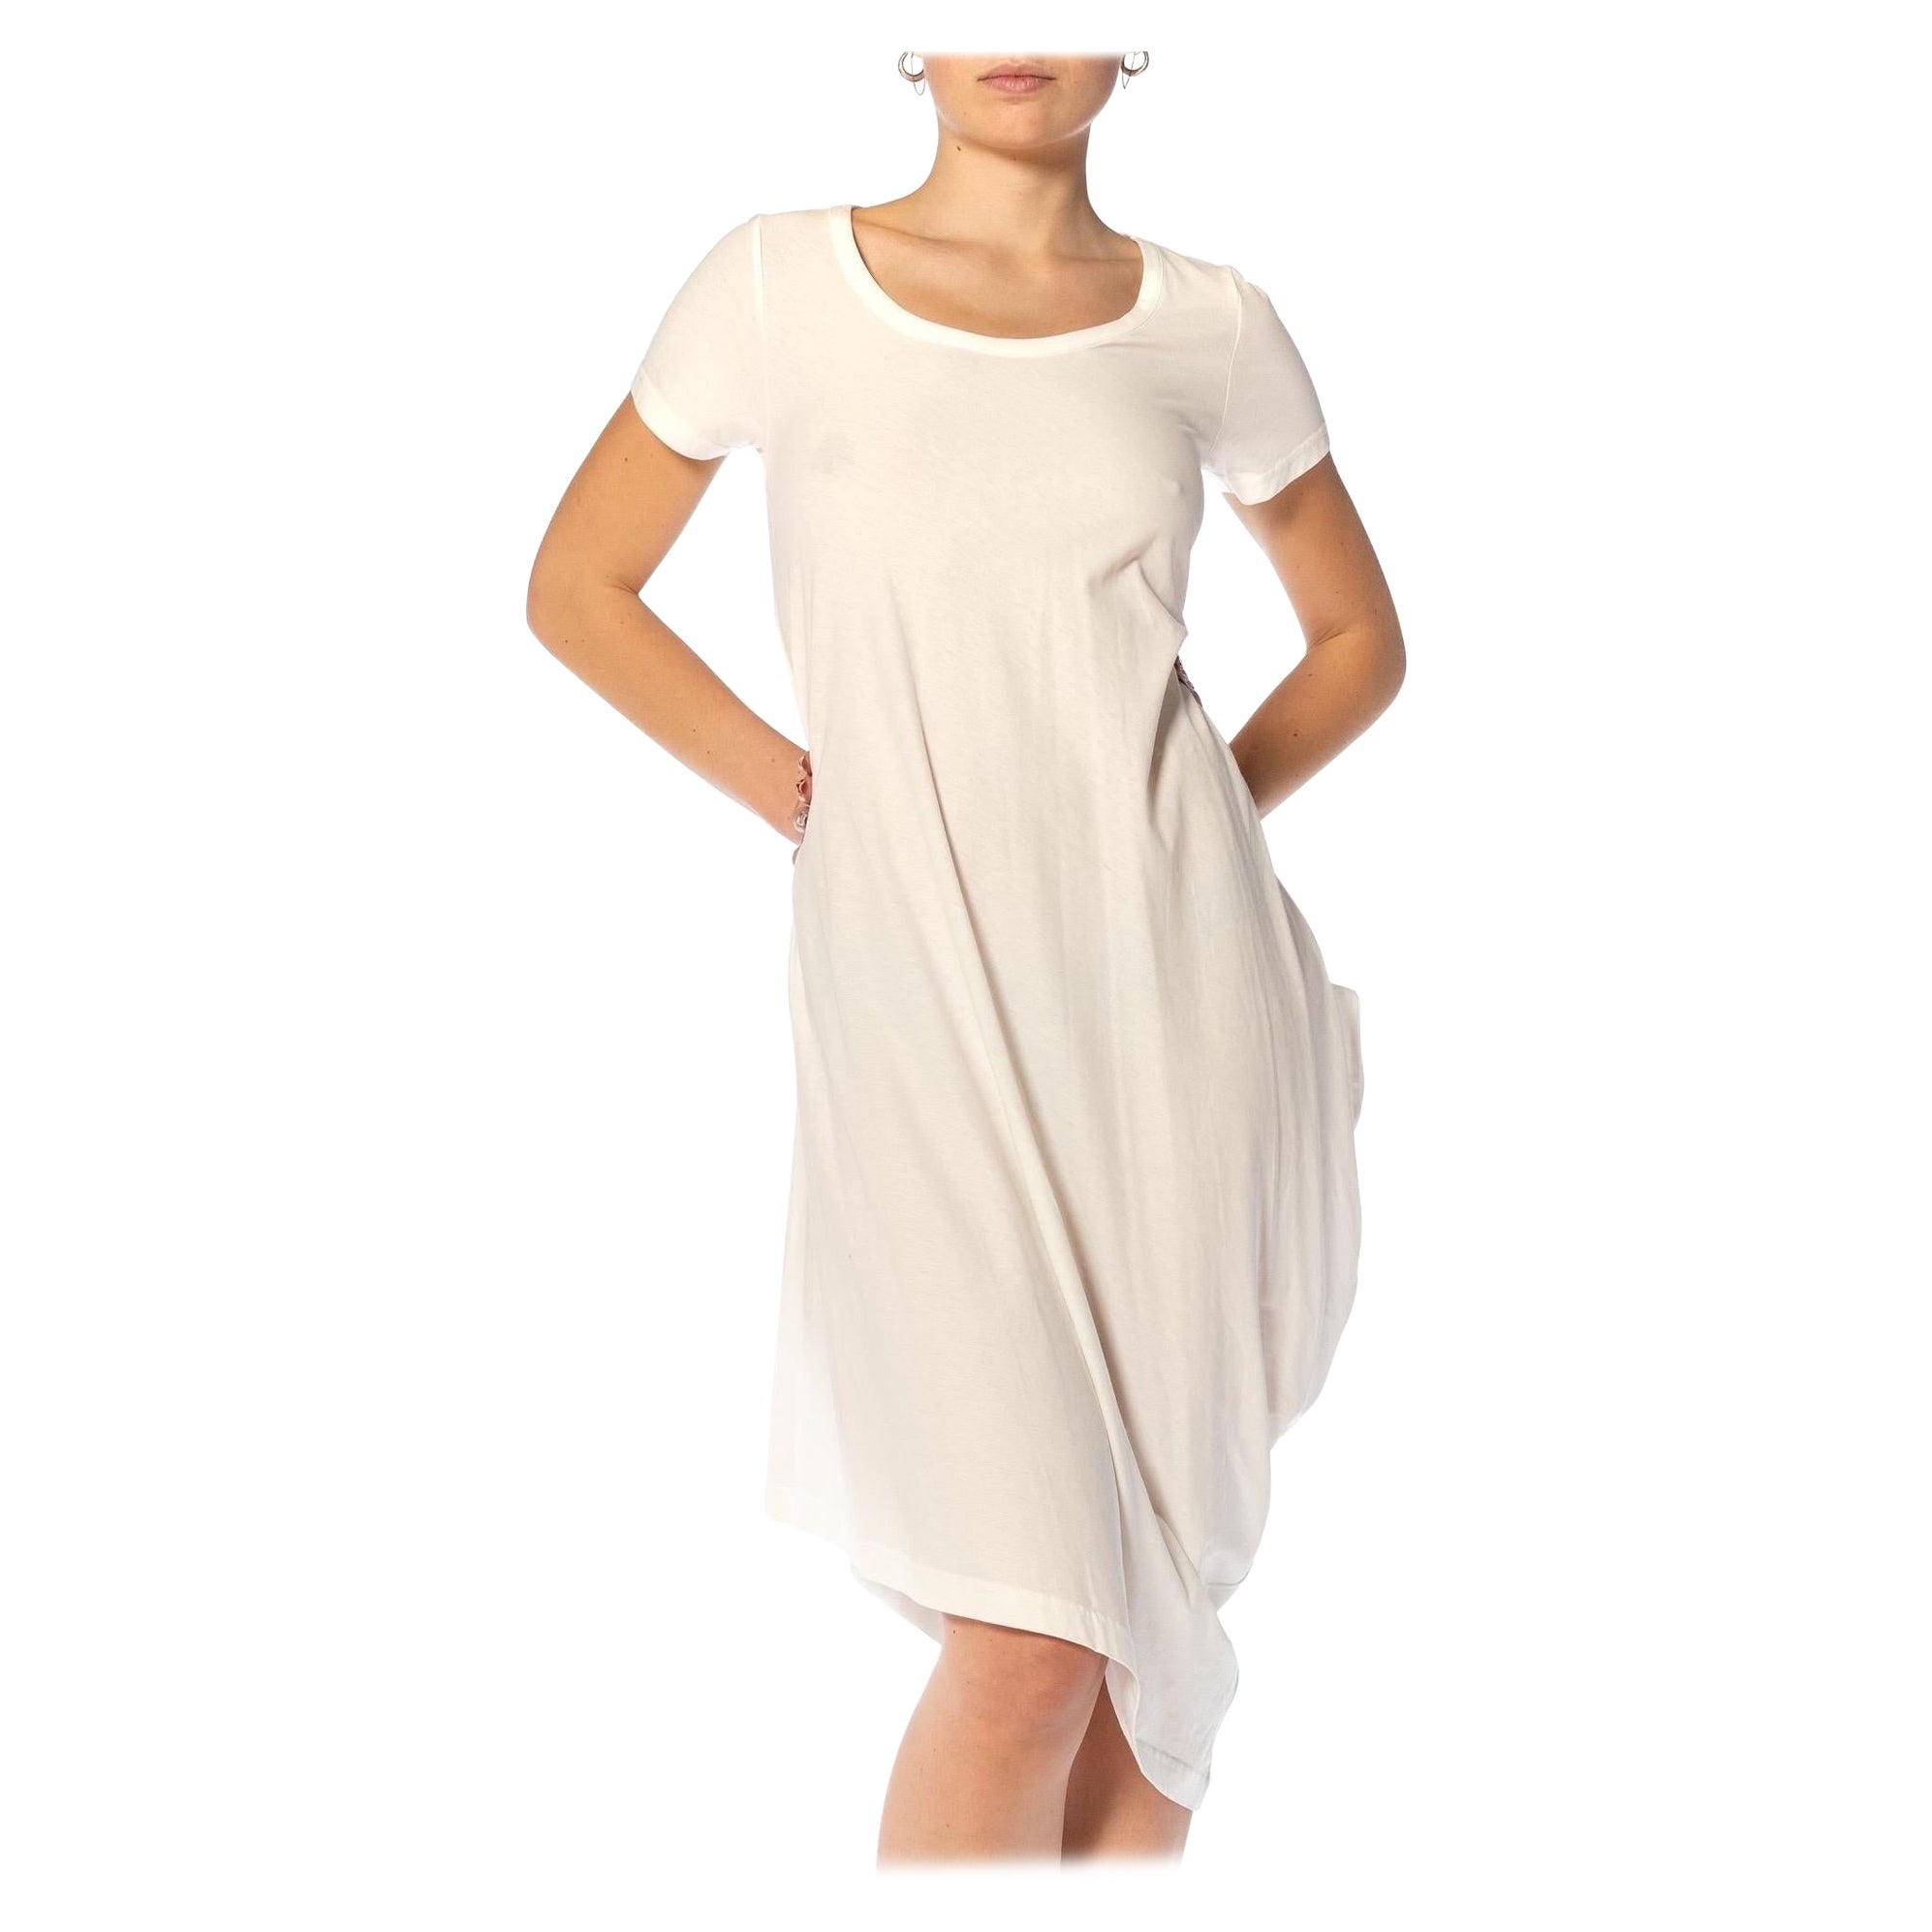 1990S LIMI White Cotton Dress With Pocket For Sale